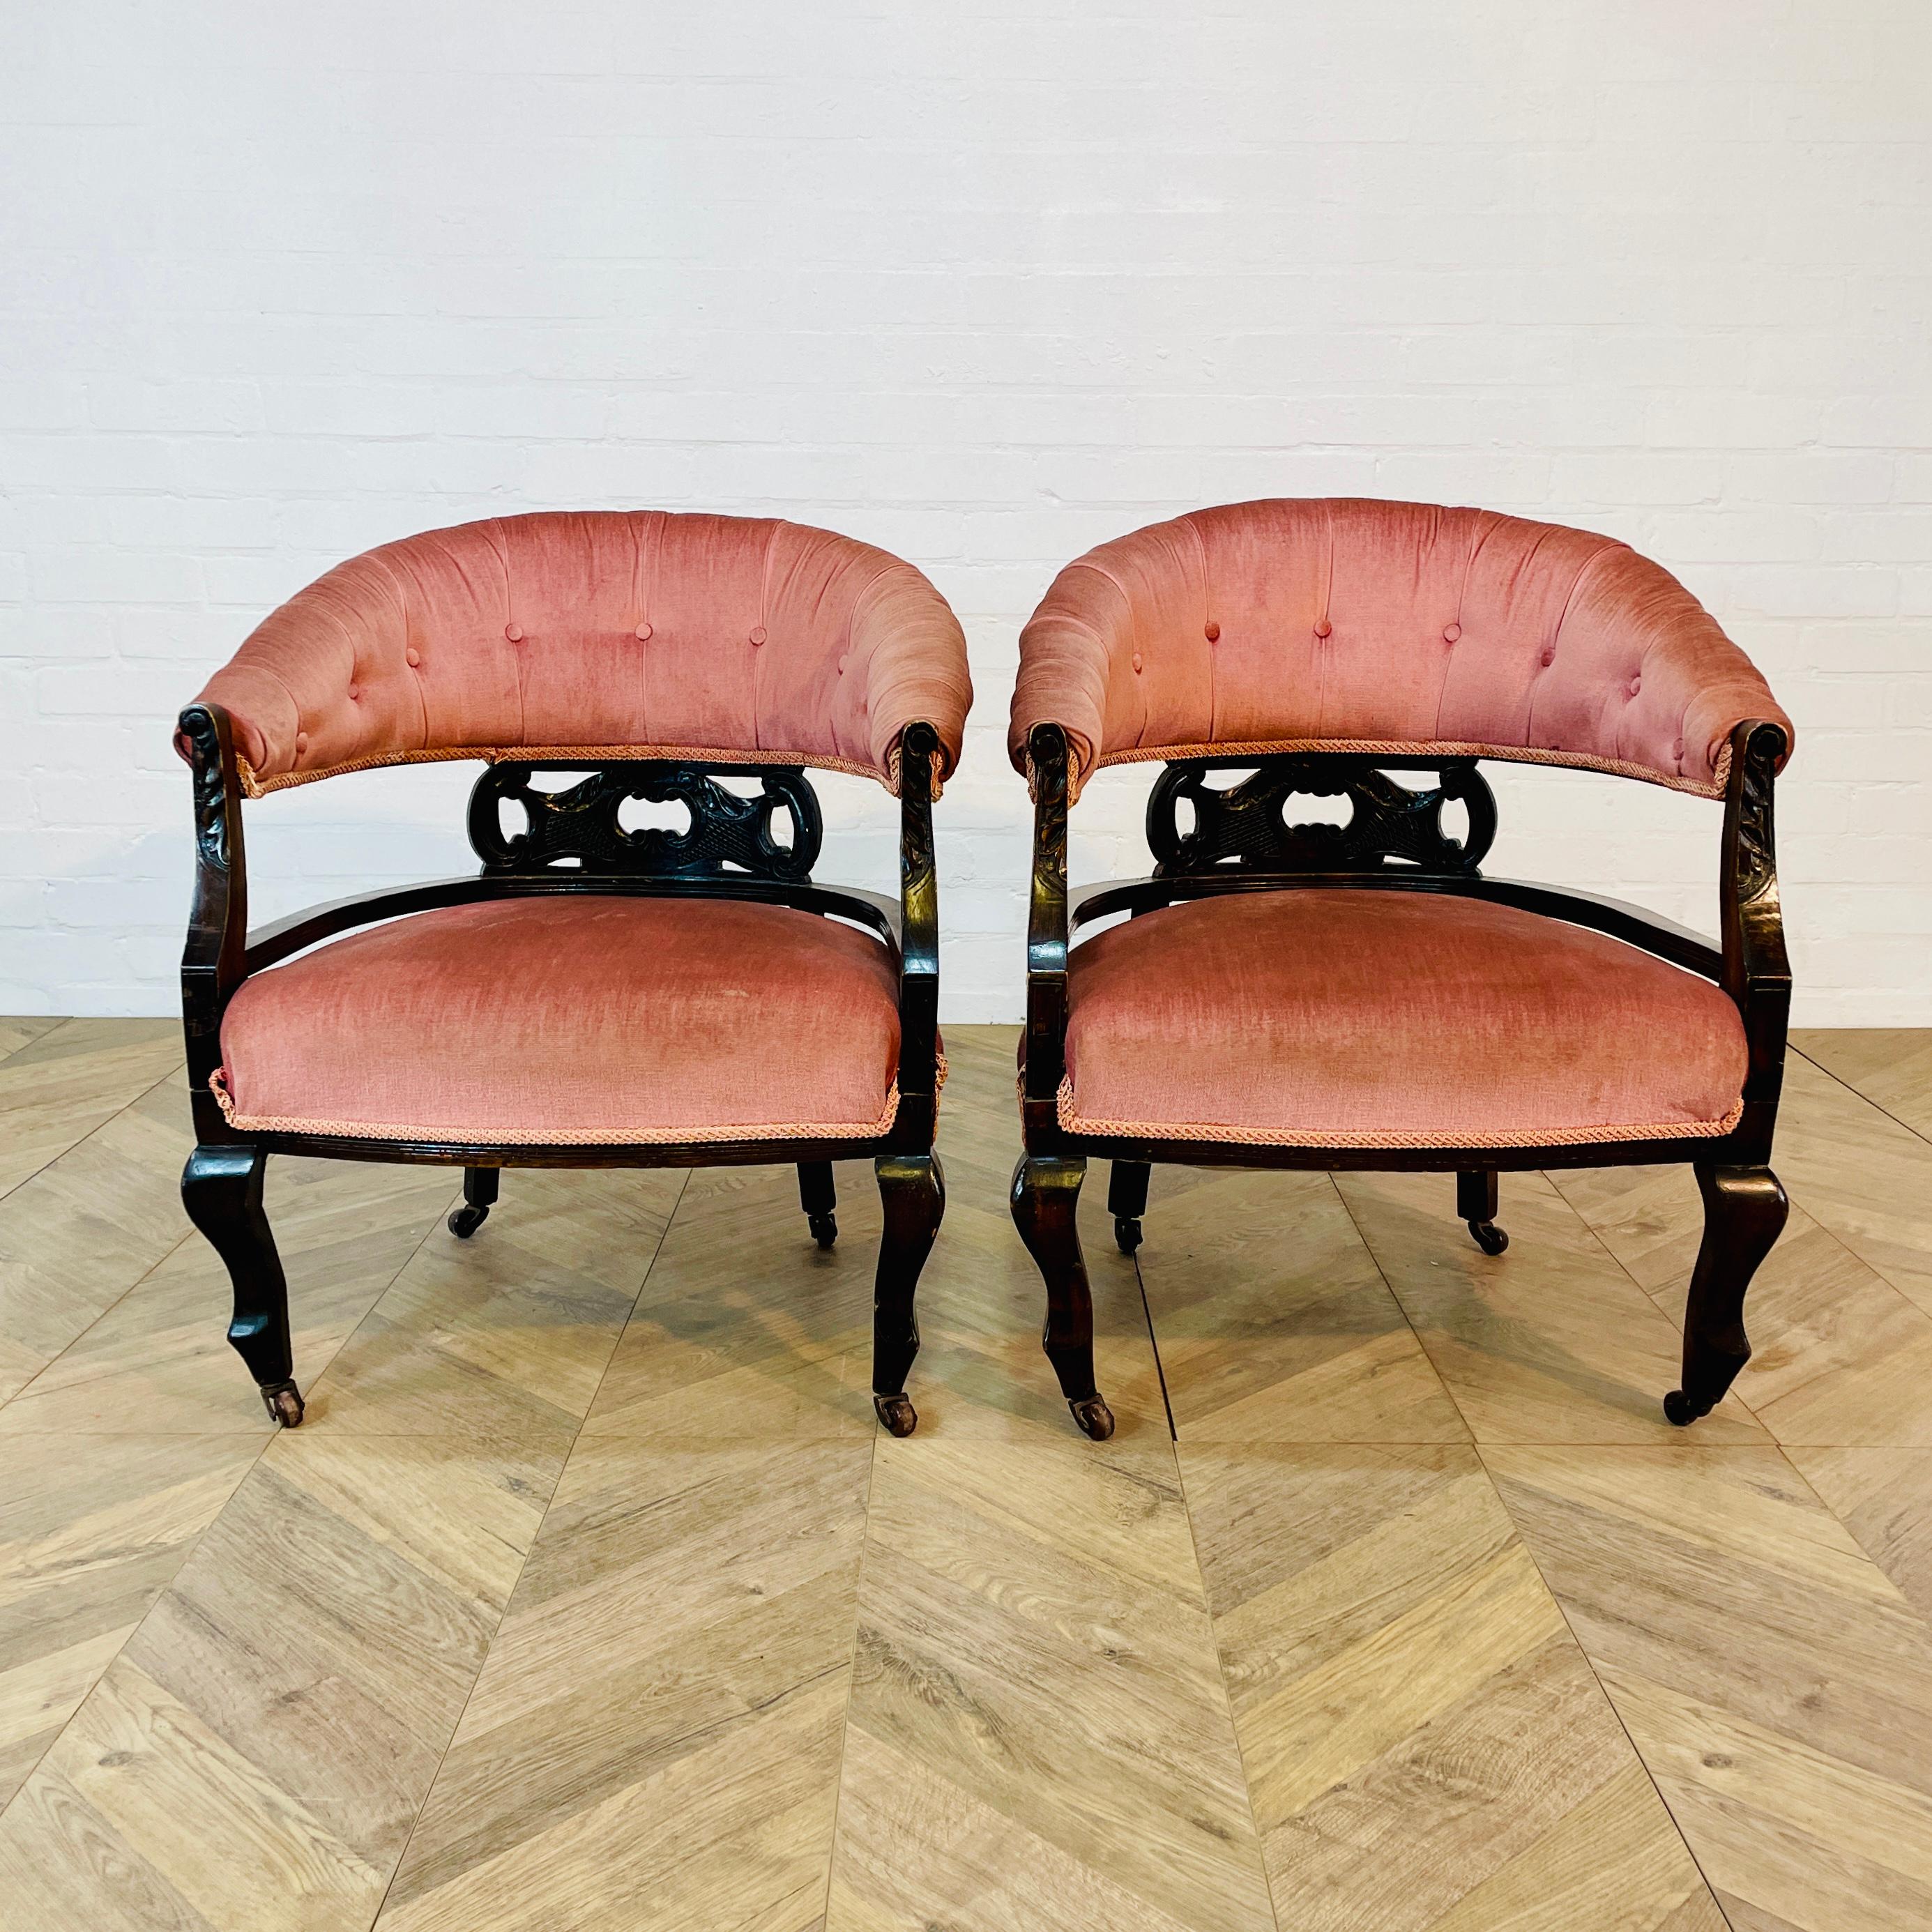 A Pair of Well Proportioned, Low Armchairs, Circa 1900s.

The armchairs features a lovely curved back with detailed work and it sit on castors.

The pink upholstery is in good antique condition, with no visible scuffs or marks (as pictured).

The